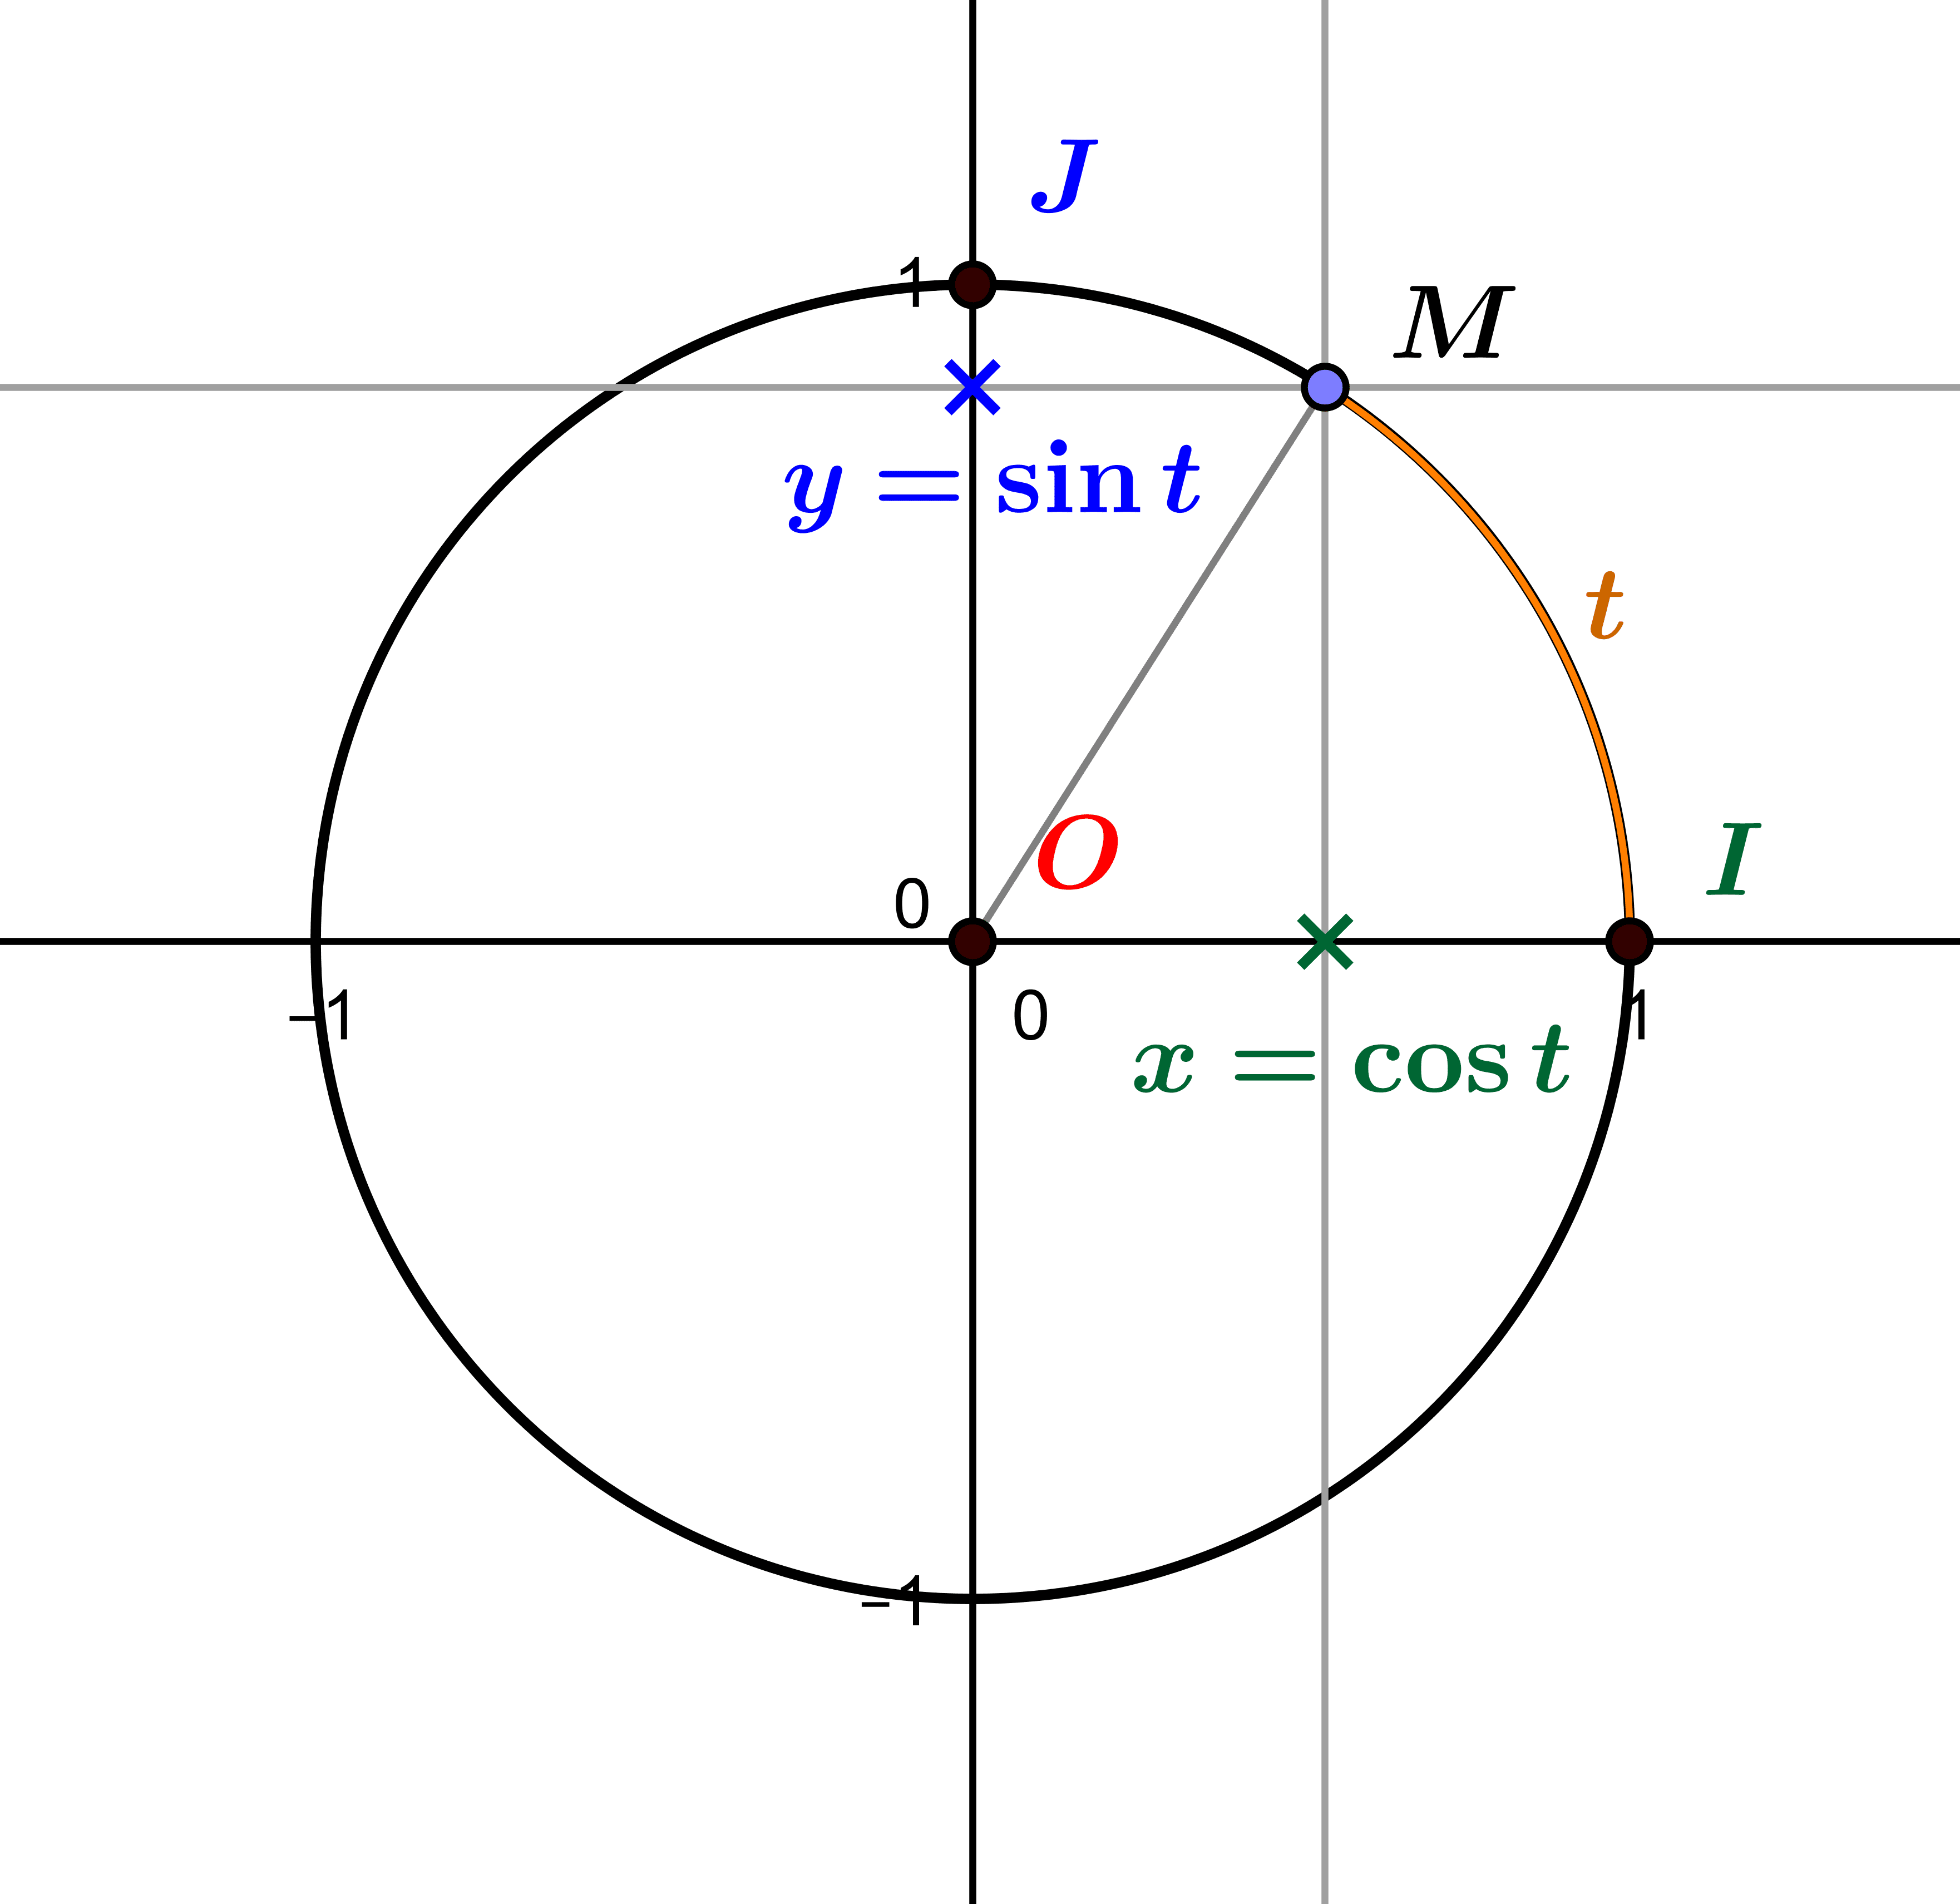 Drawing a circle on the plane: equation and parameters